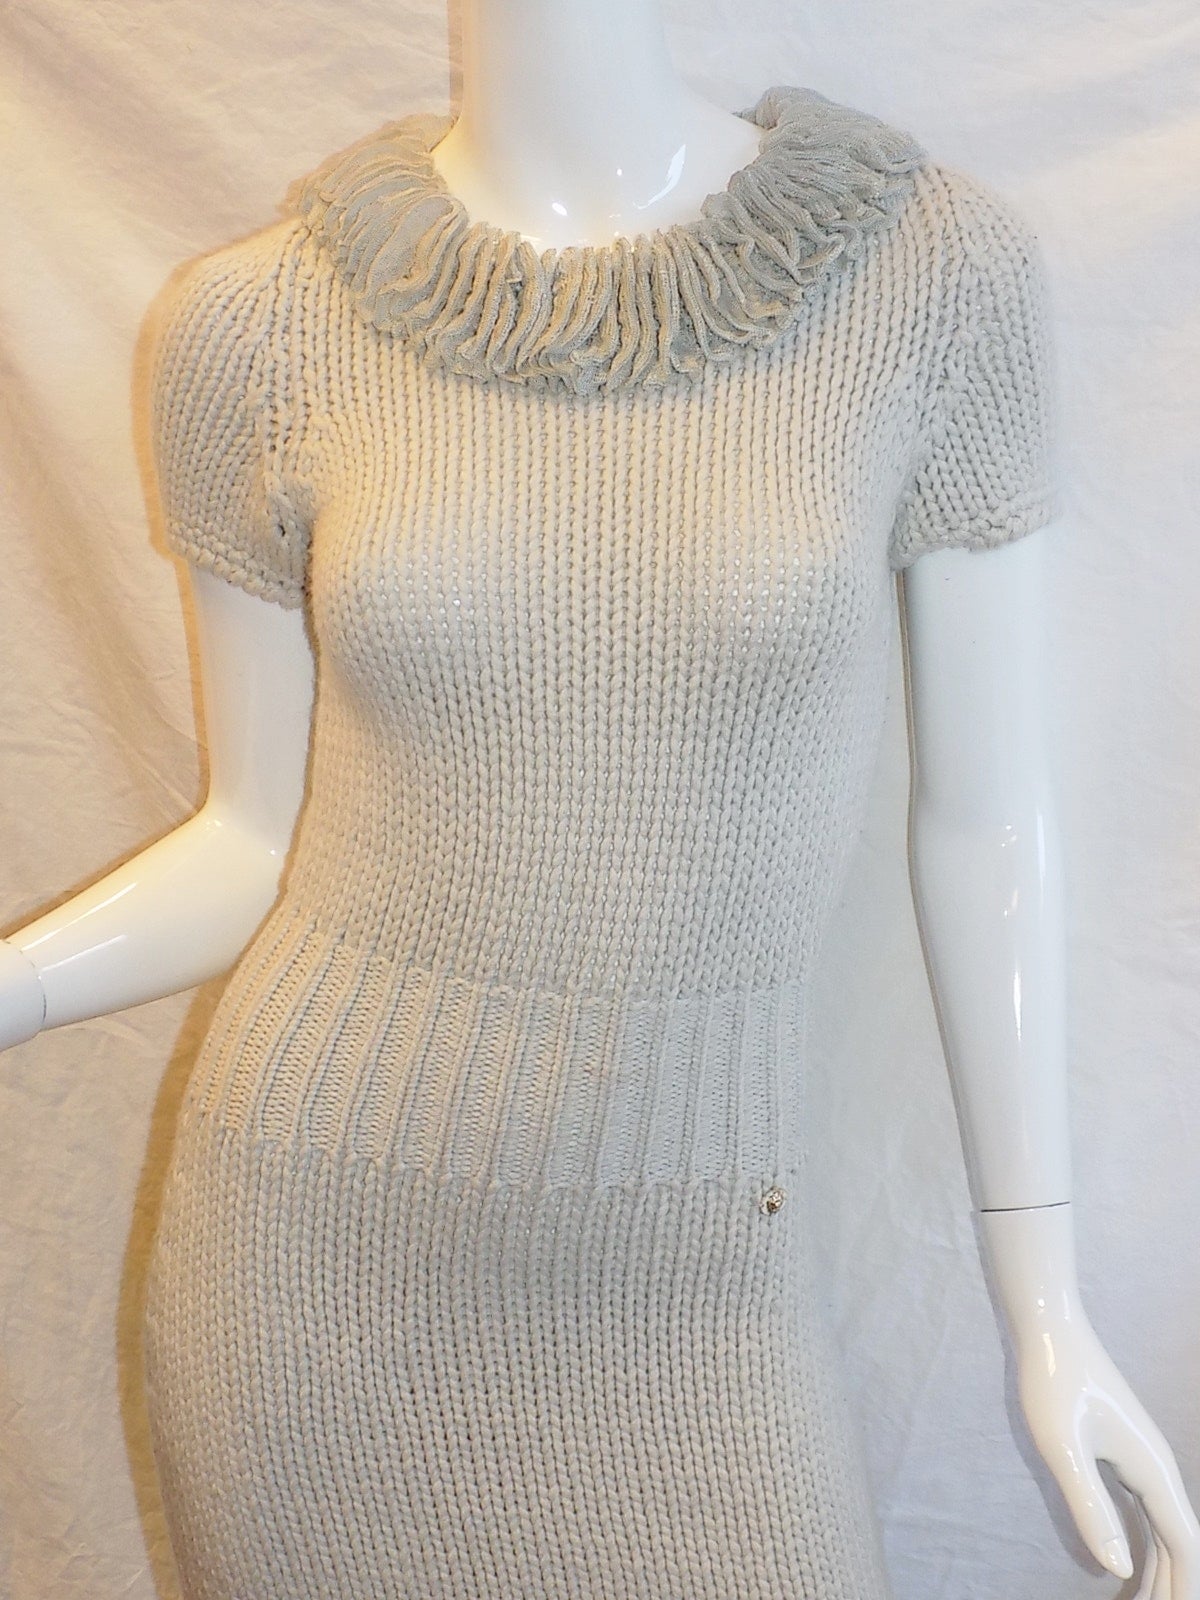 This wonderful cashmere knit dress comes from the Chanel Autumn 2008 collection. It features a net  ruffle neckline and hem, an over sized yarn knit, and a wonderful fit; truly a must have! Pristine condition like new!
 

US Size: 34
Made In: